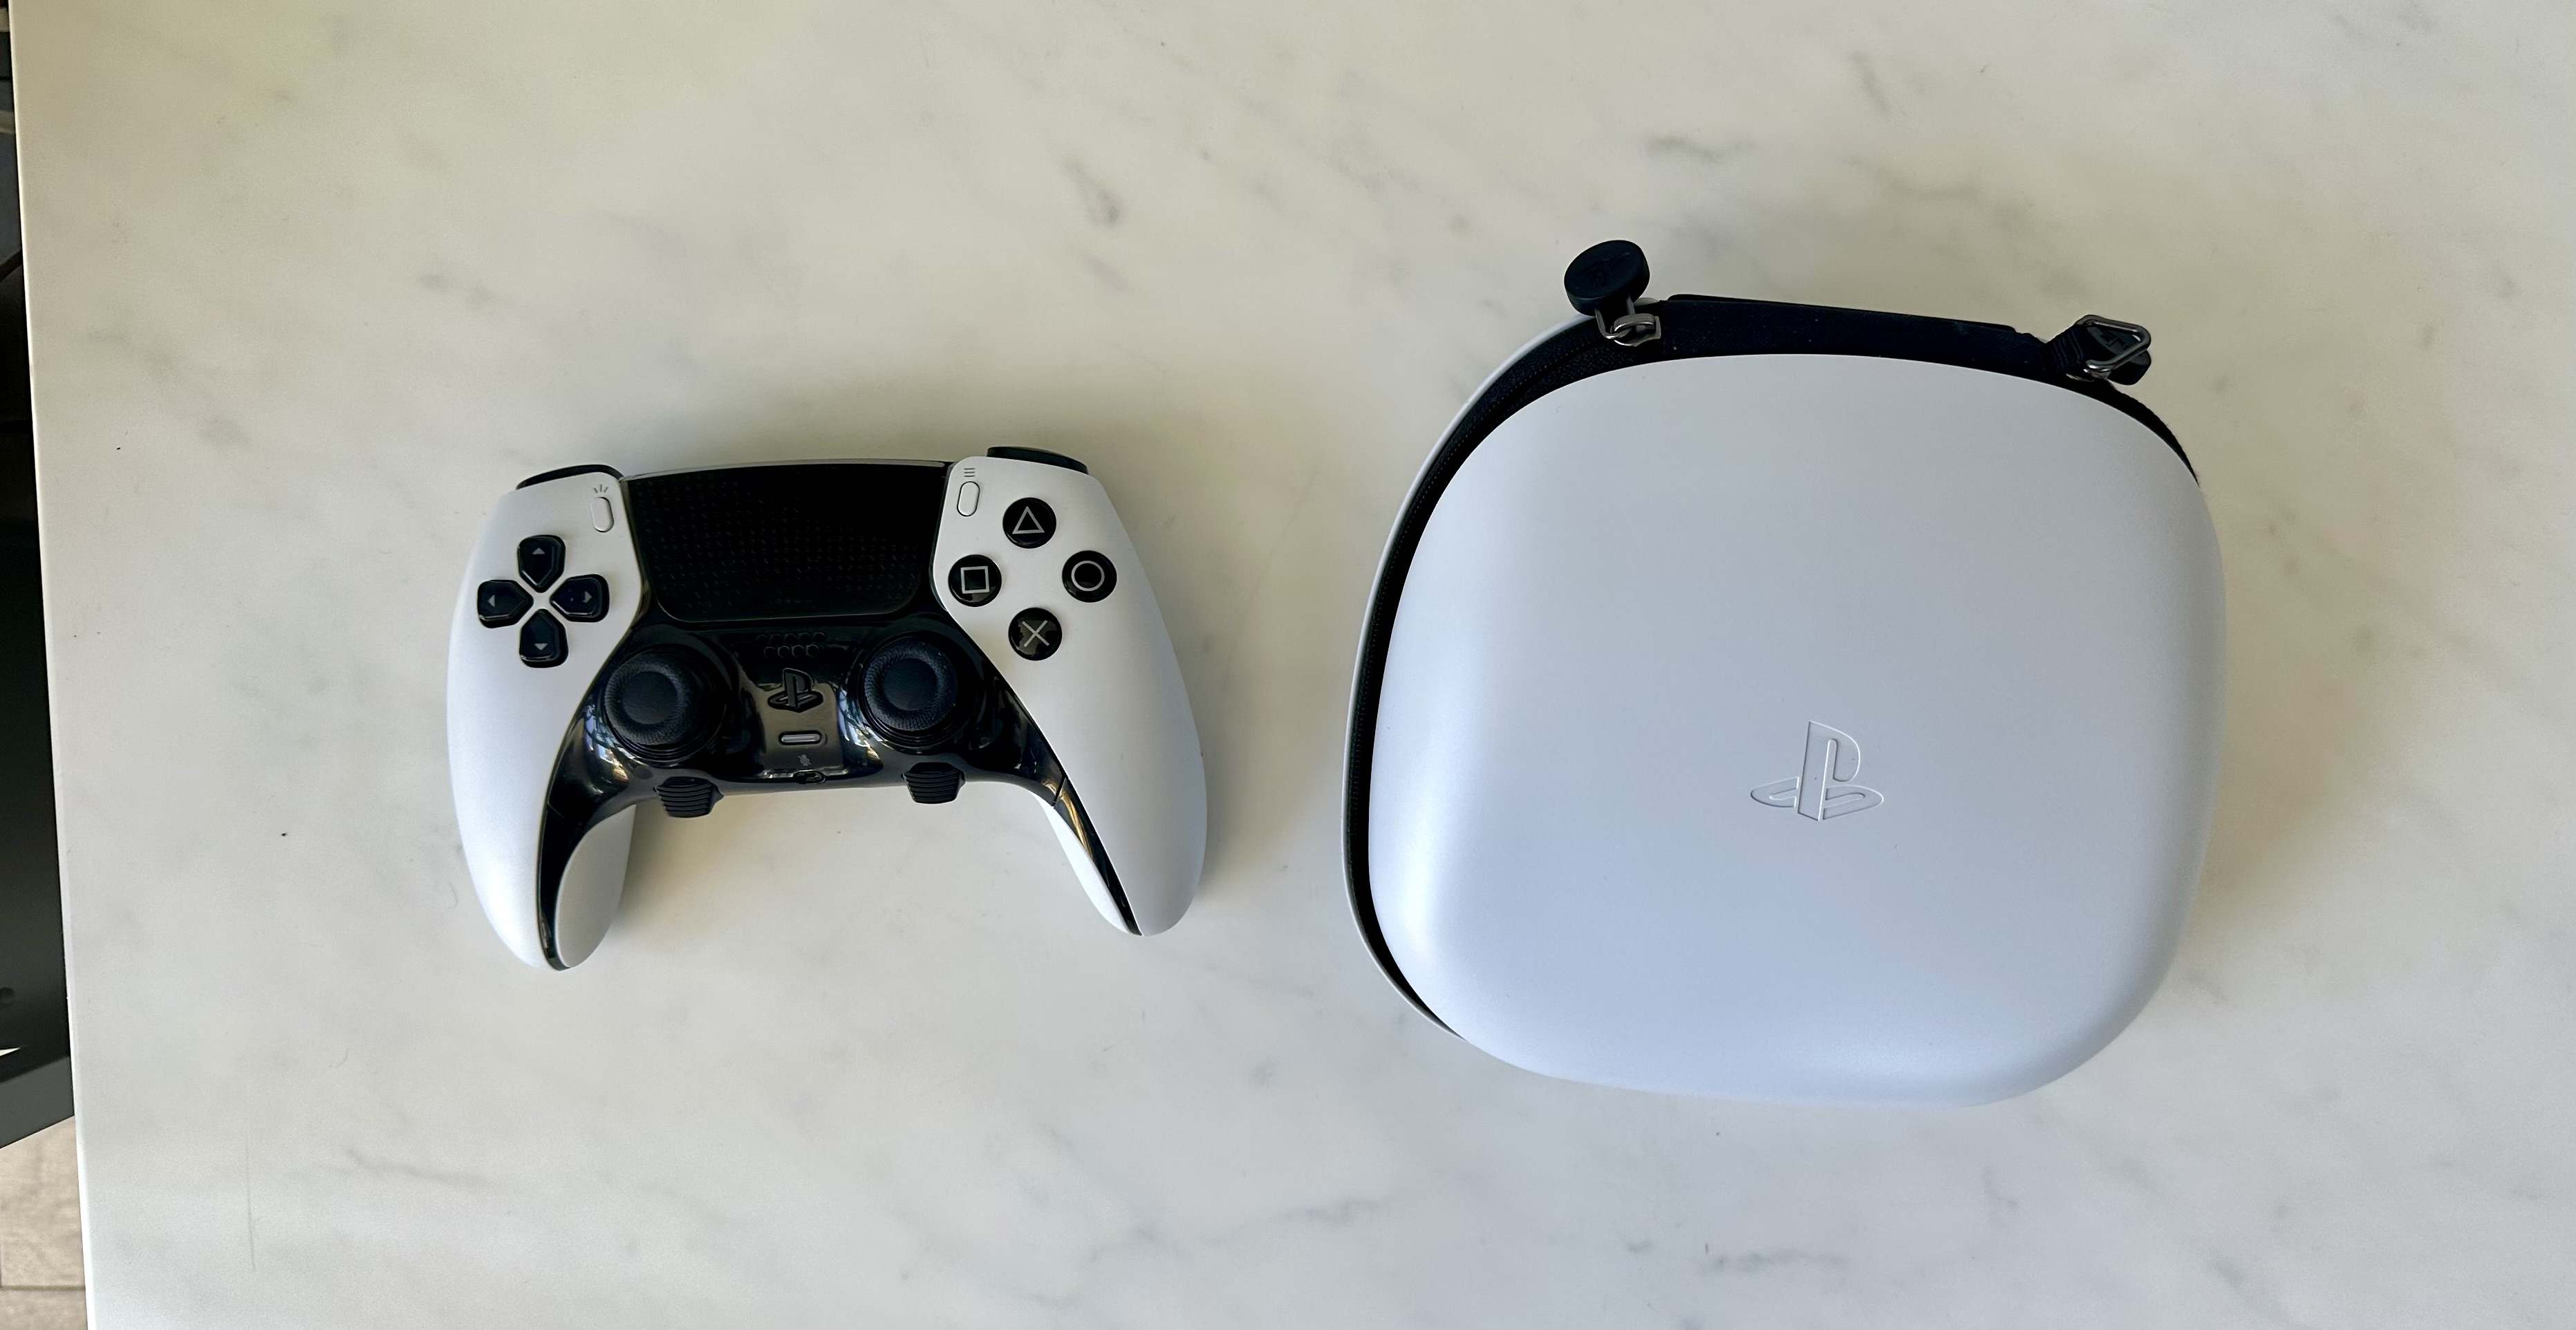 PlayStation DualSense Edge Controller: Preorder, Price, Release Date